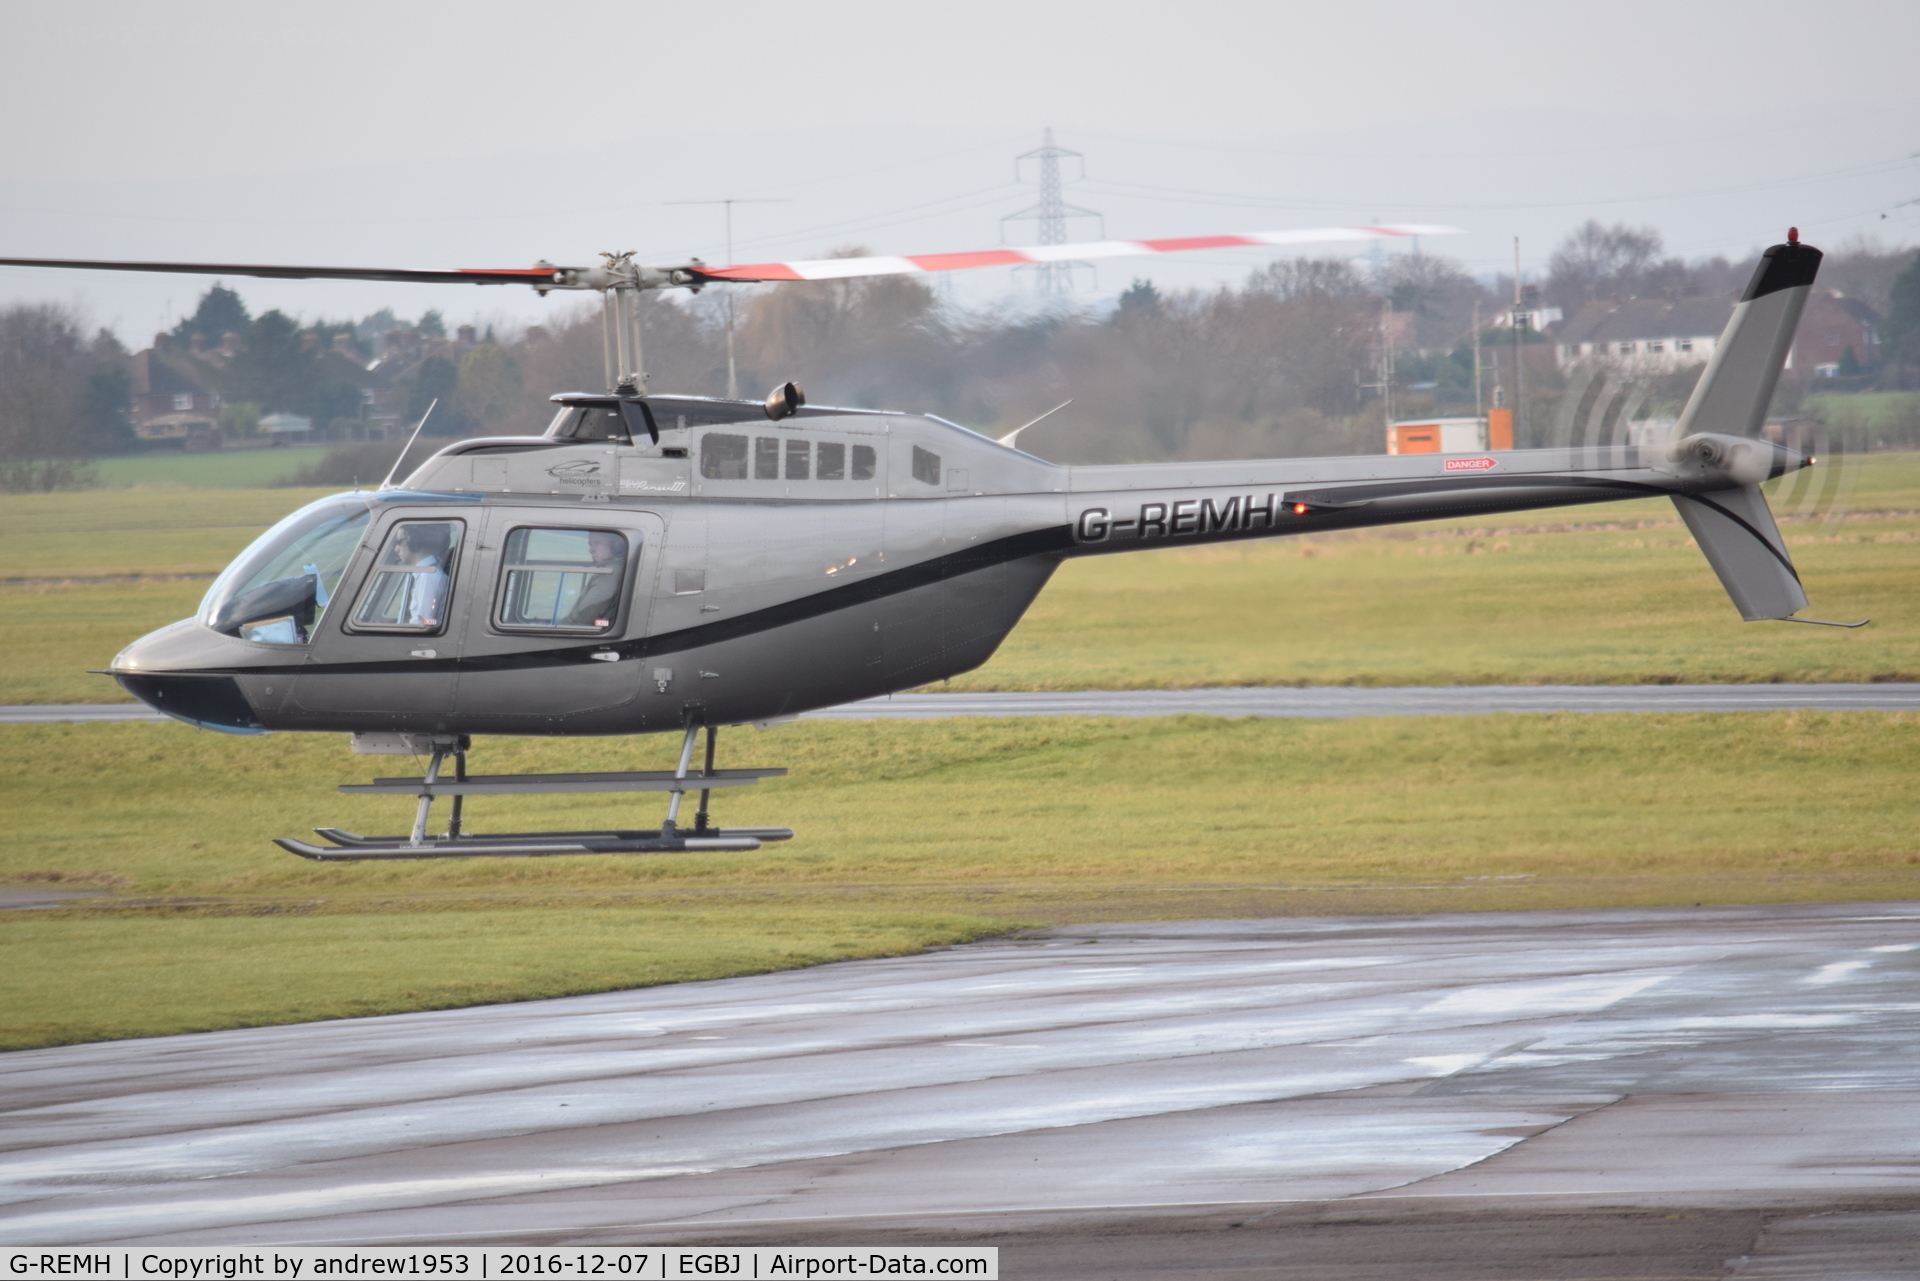 G-REMH, 2007 Bell 206B JetRanger III C/N 4626, G-REMH at Gloucestershire Airport.